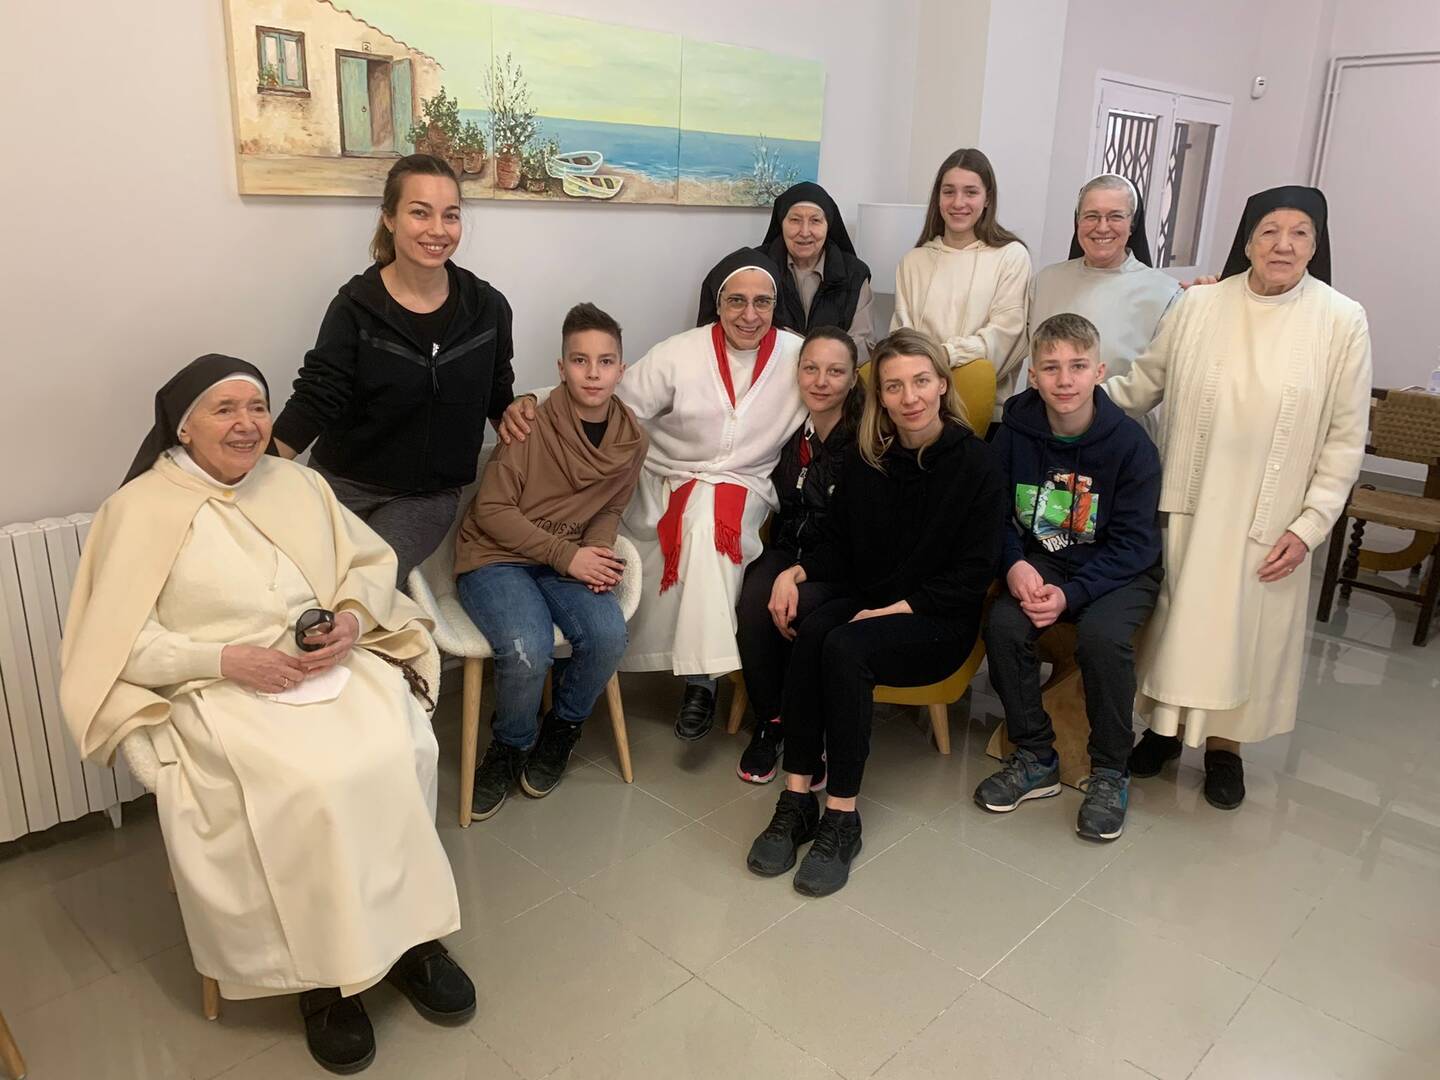 Sister Lucia's community welcomes the refugees